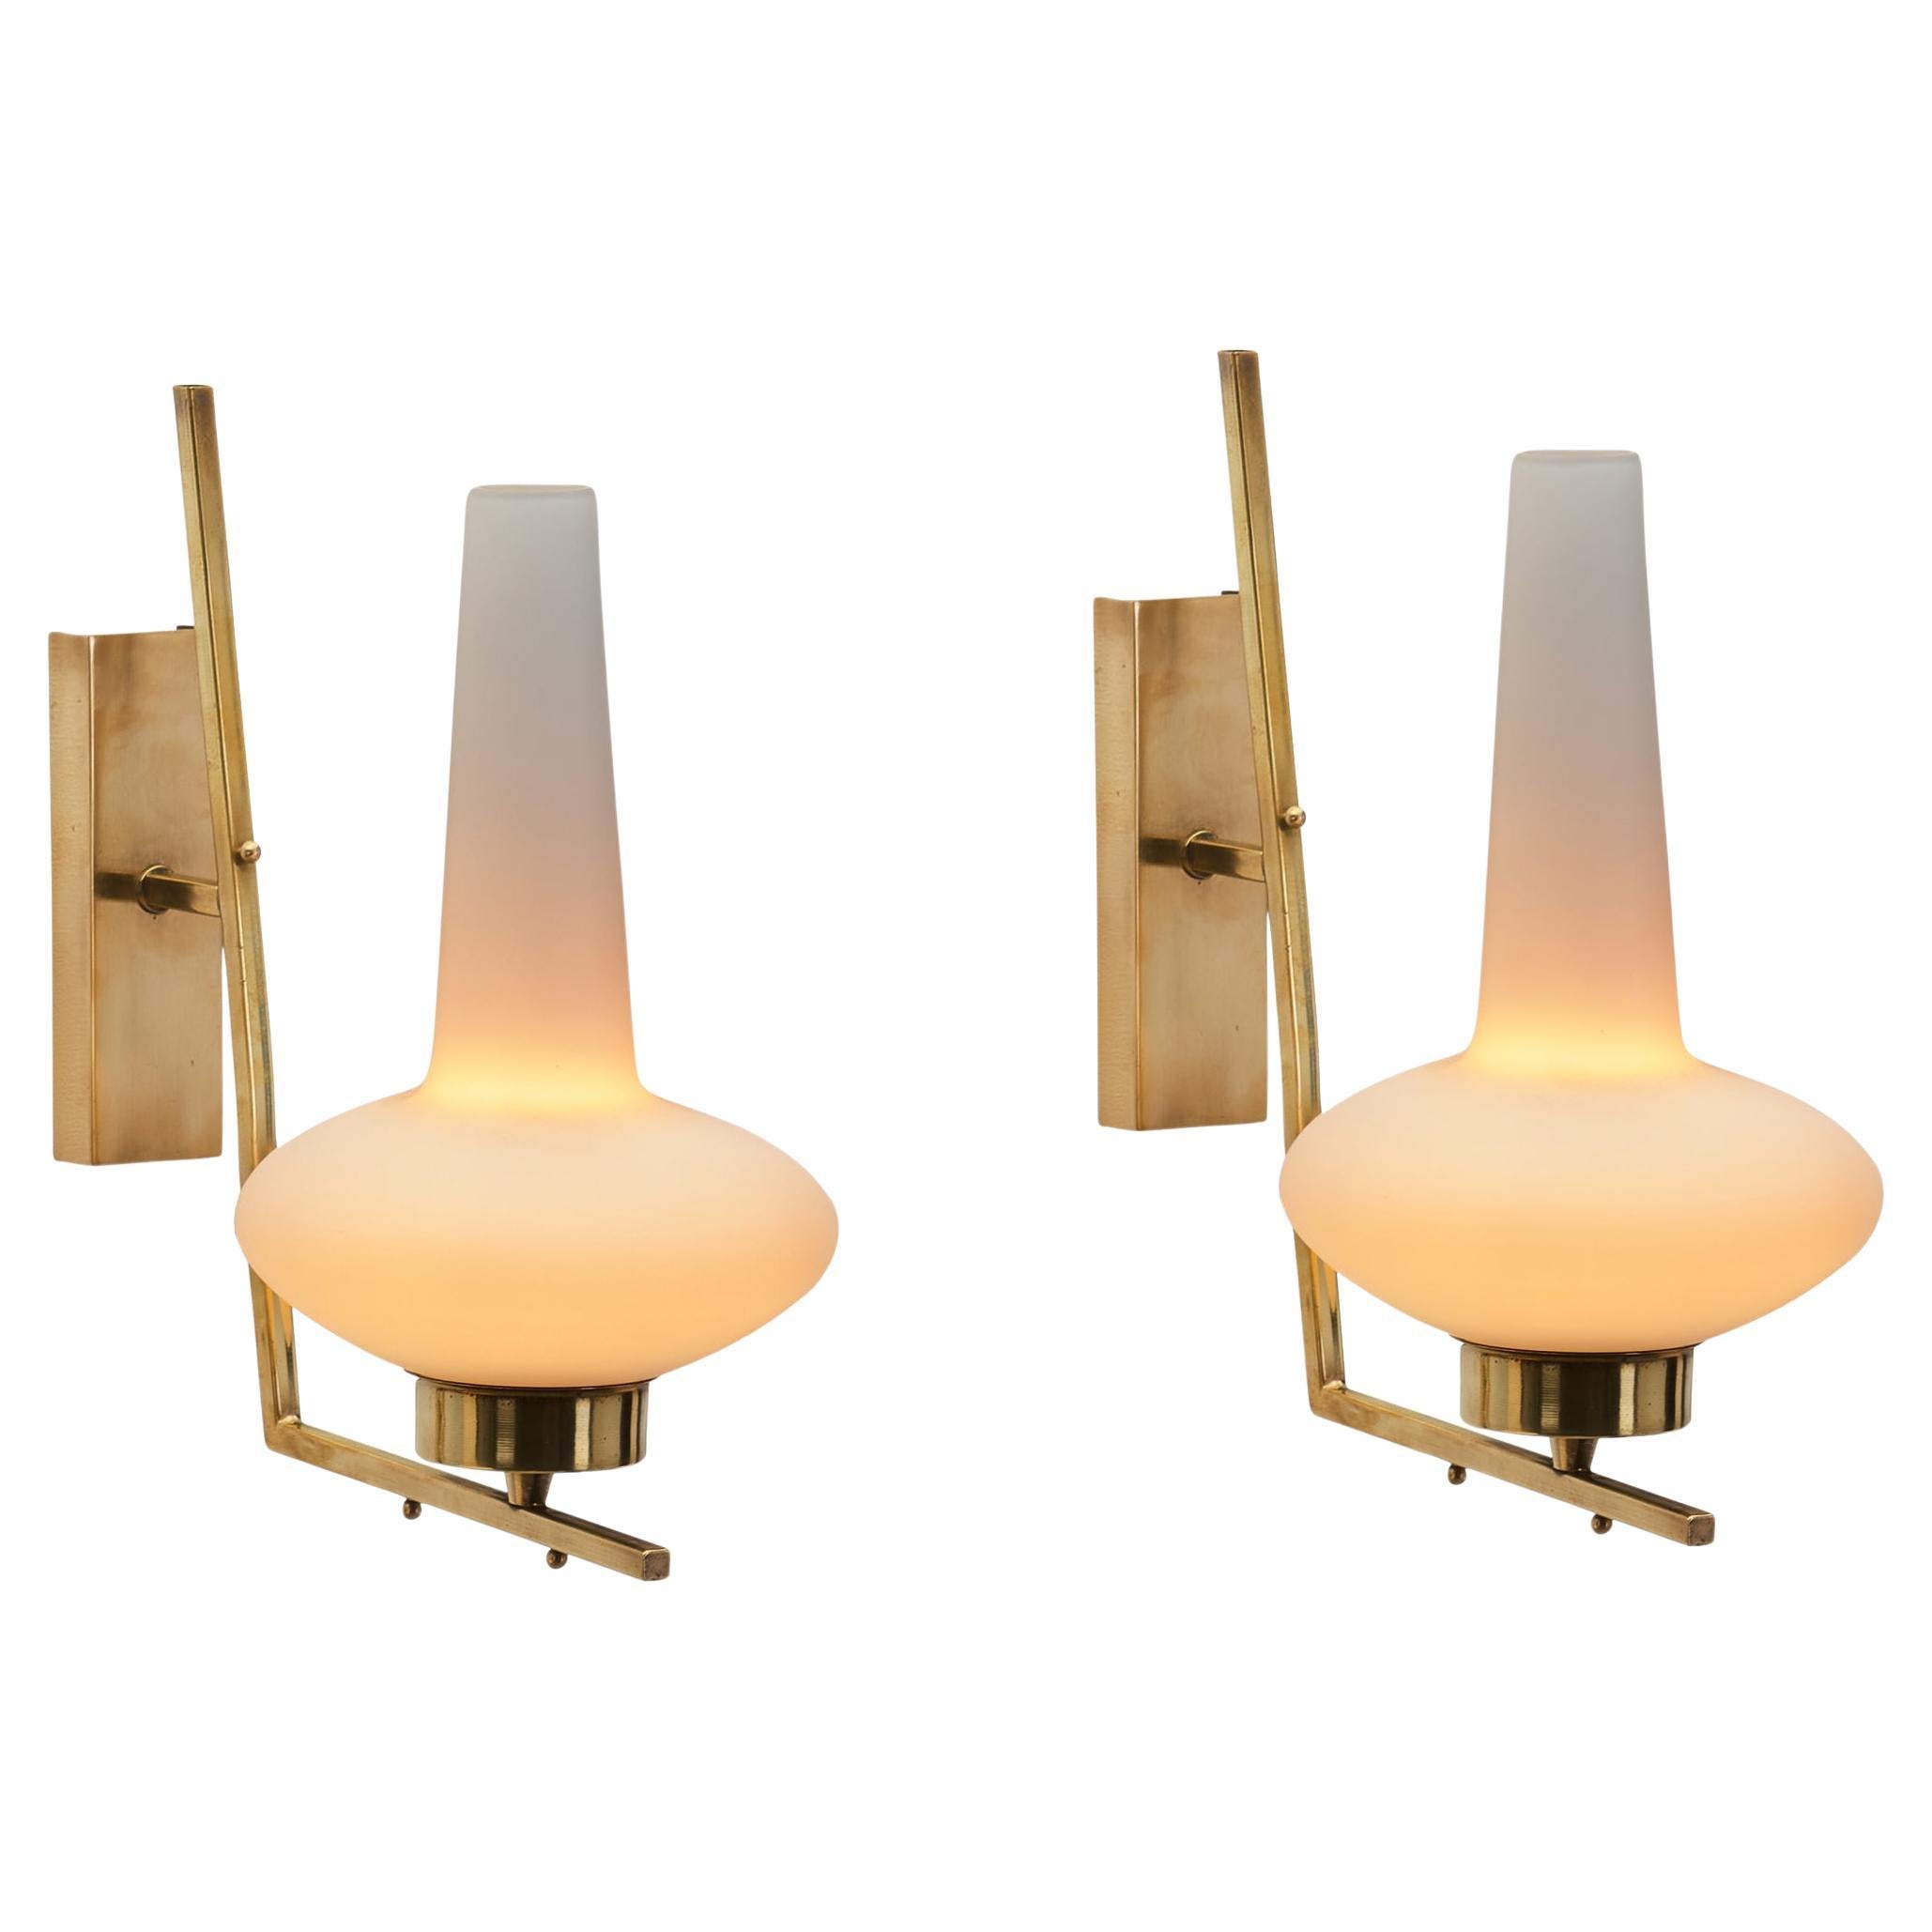 Italian Mid-Century Modern Brass Wall Lamps, Italy, 1950s For Sale